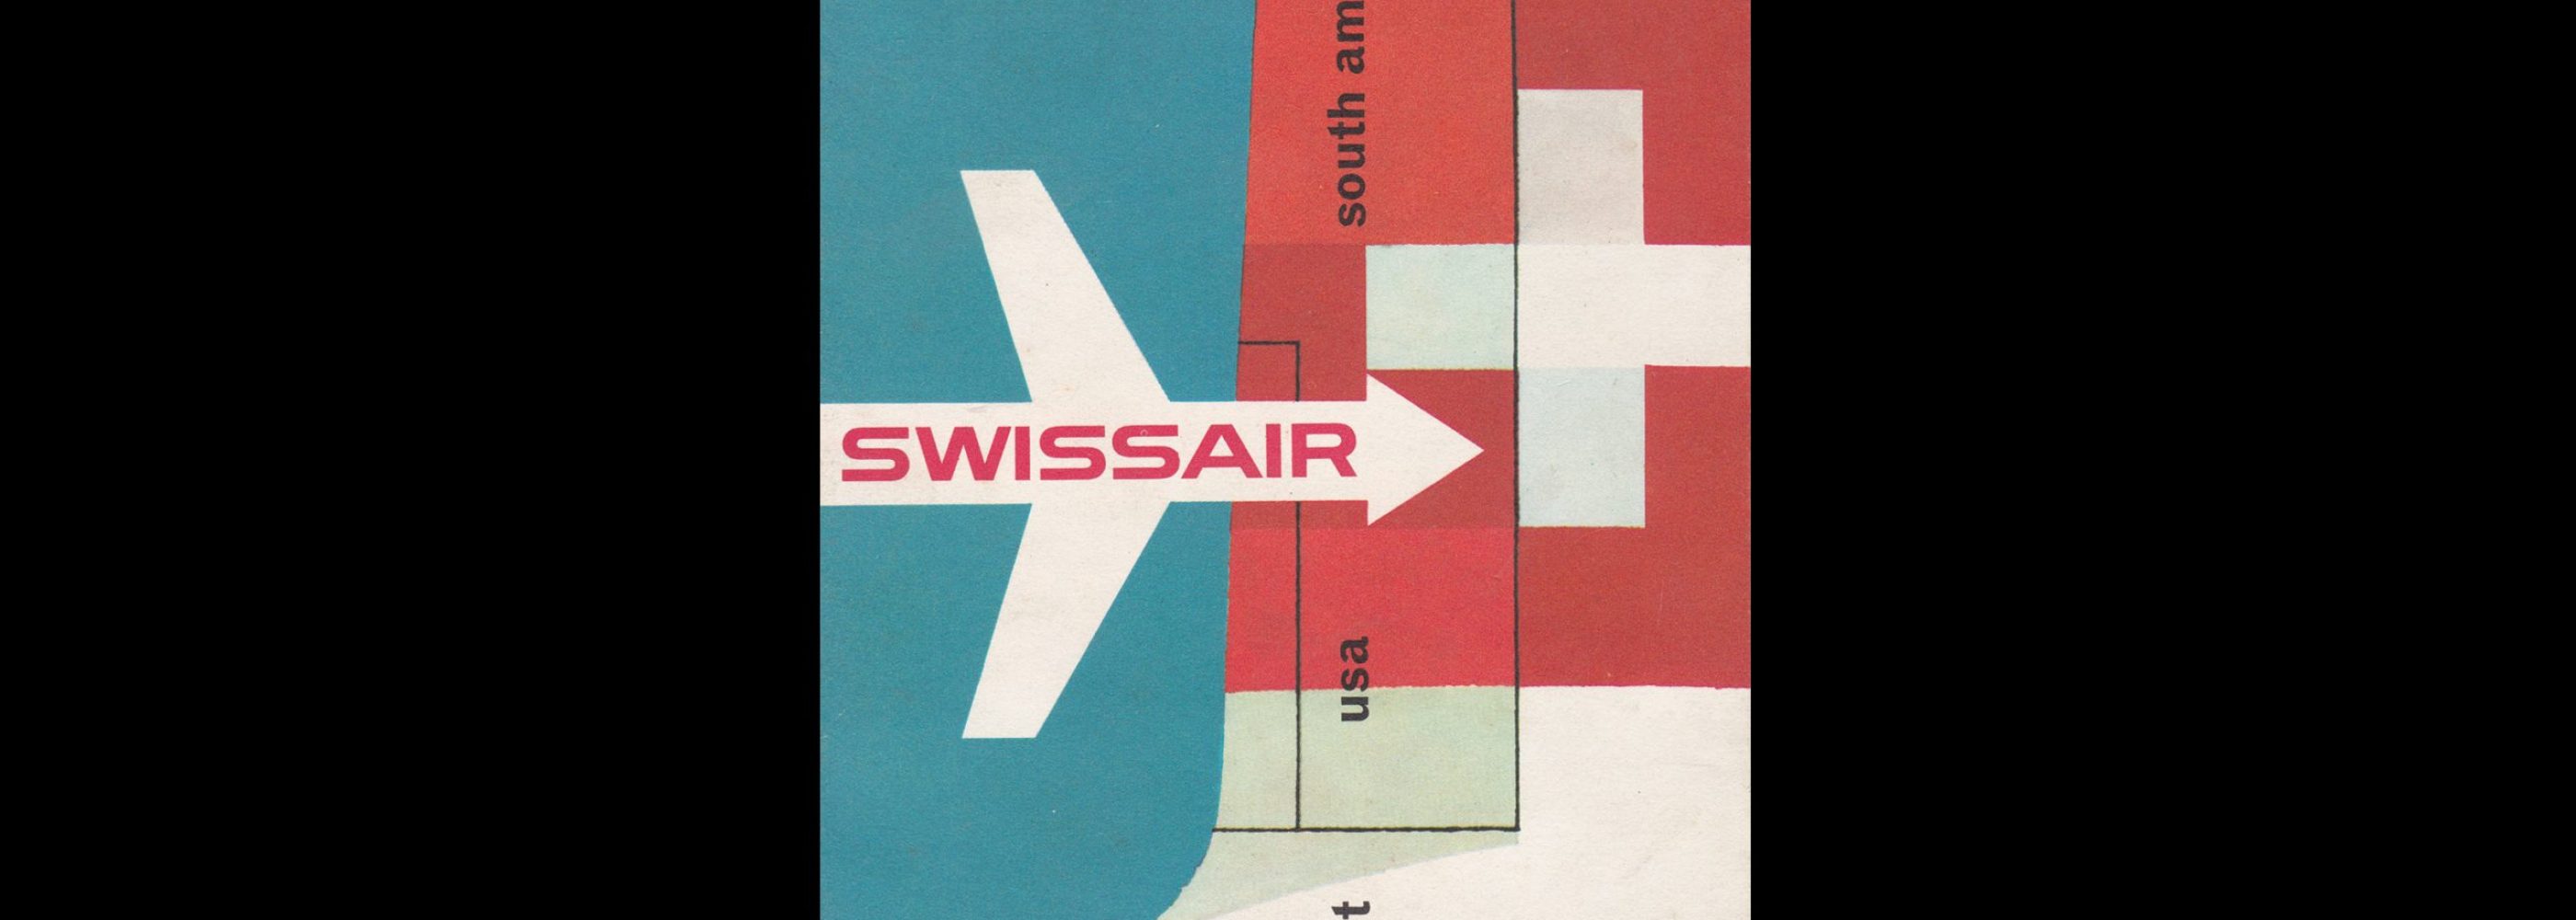 Swissair-Routes-Brochure1950s.-Designed-by-Hugo-Welti-cover